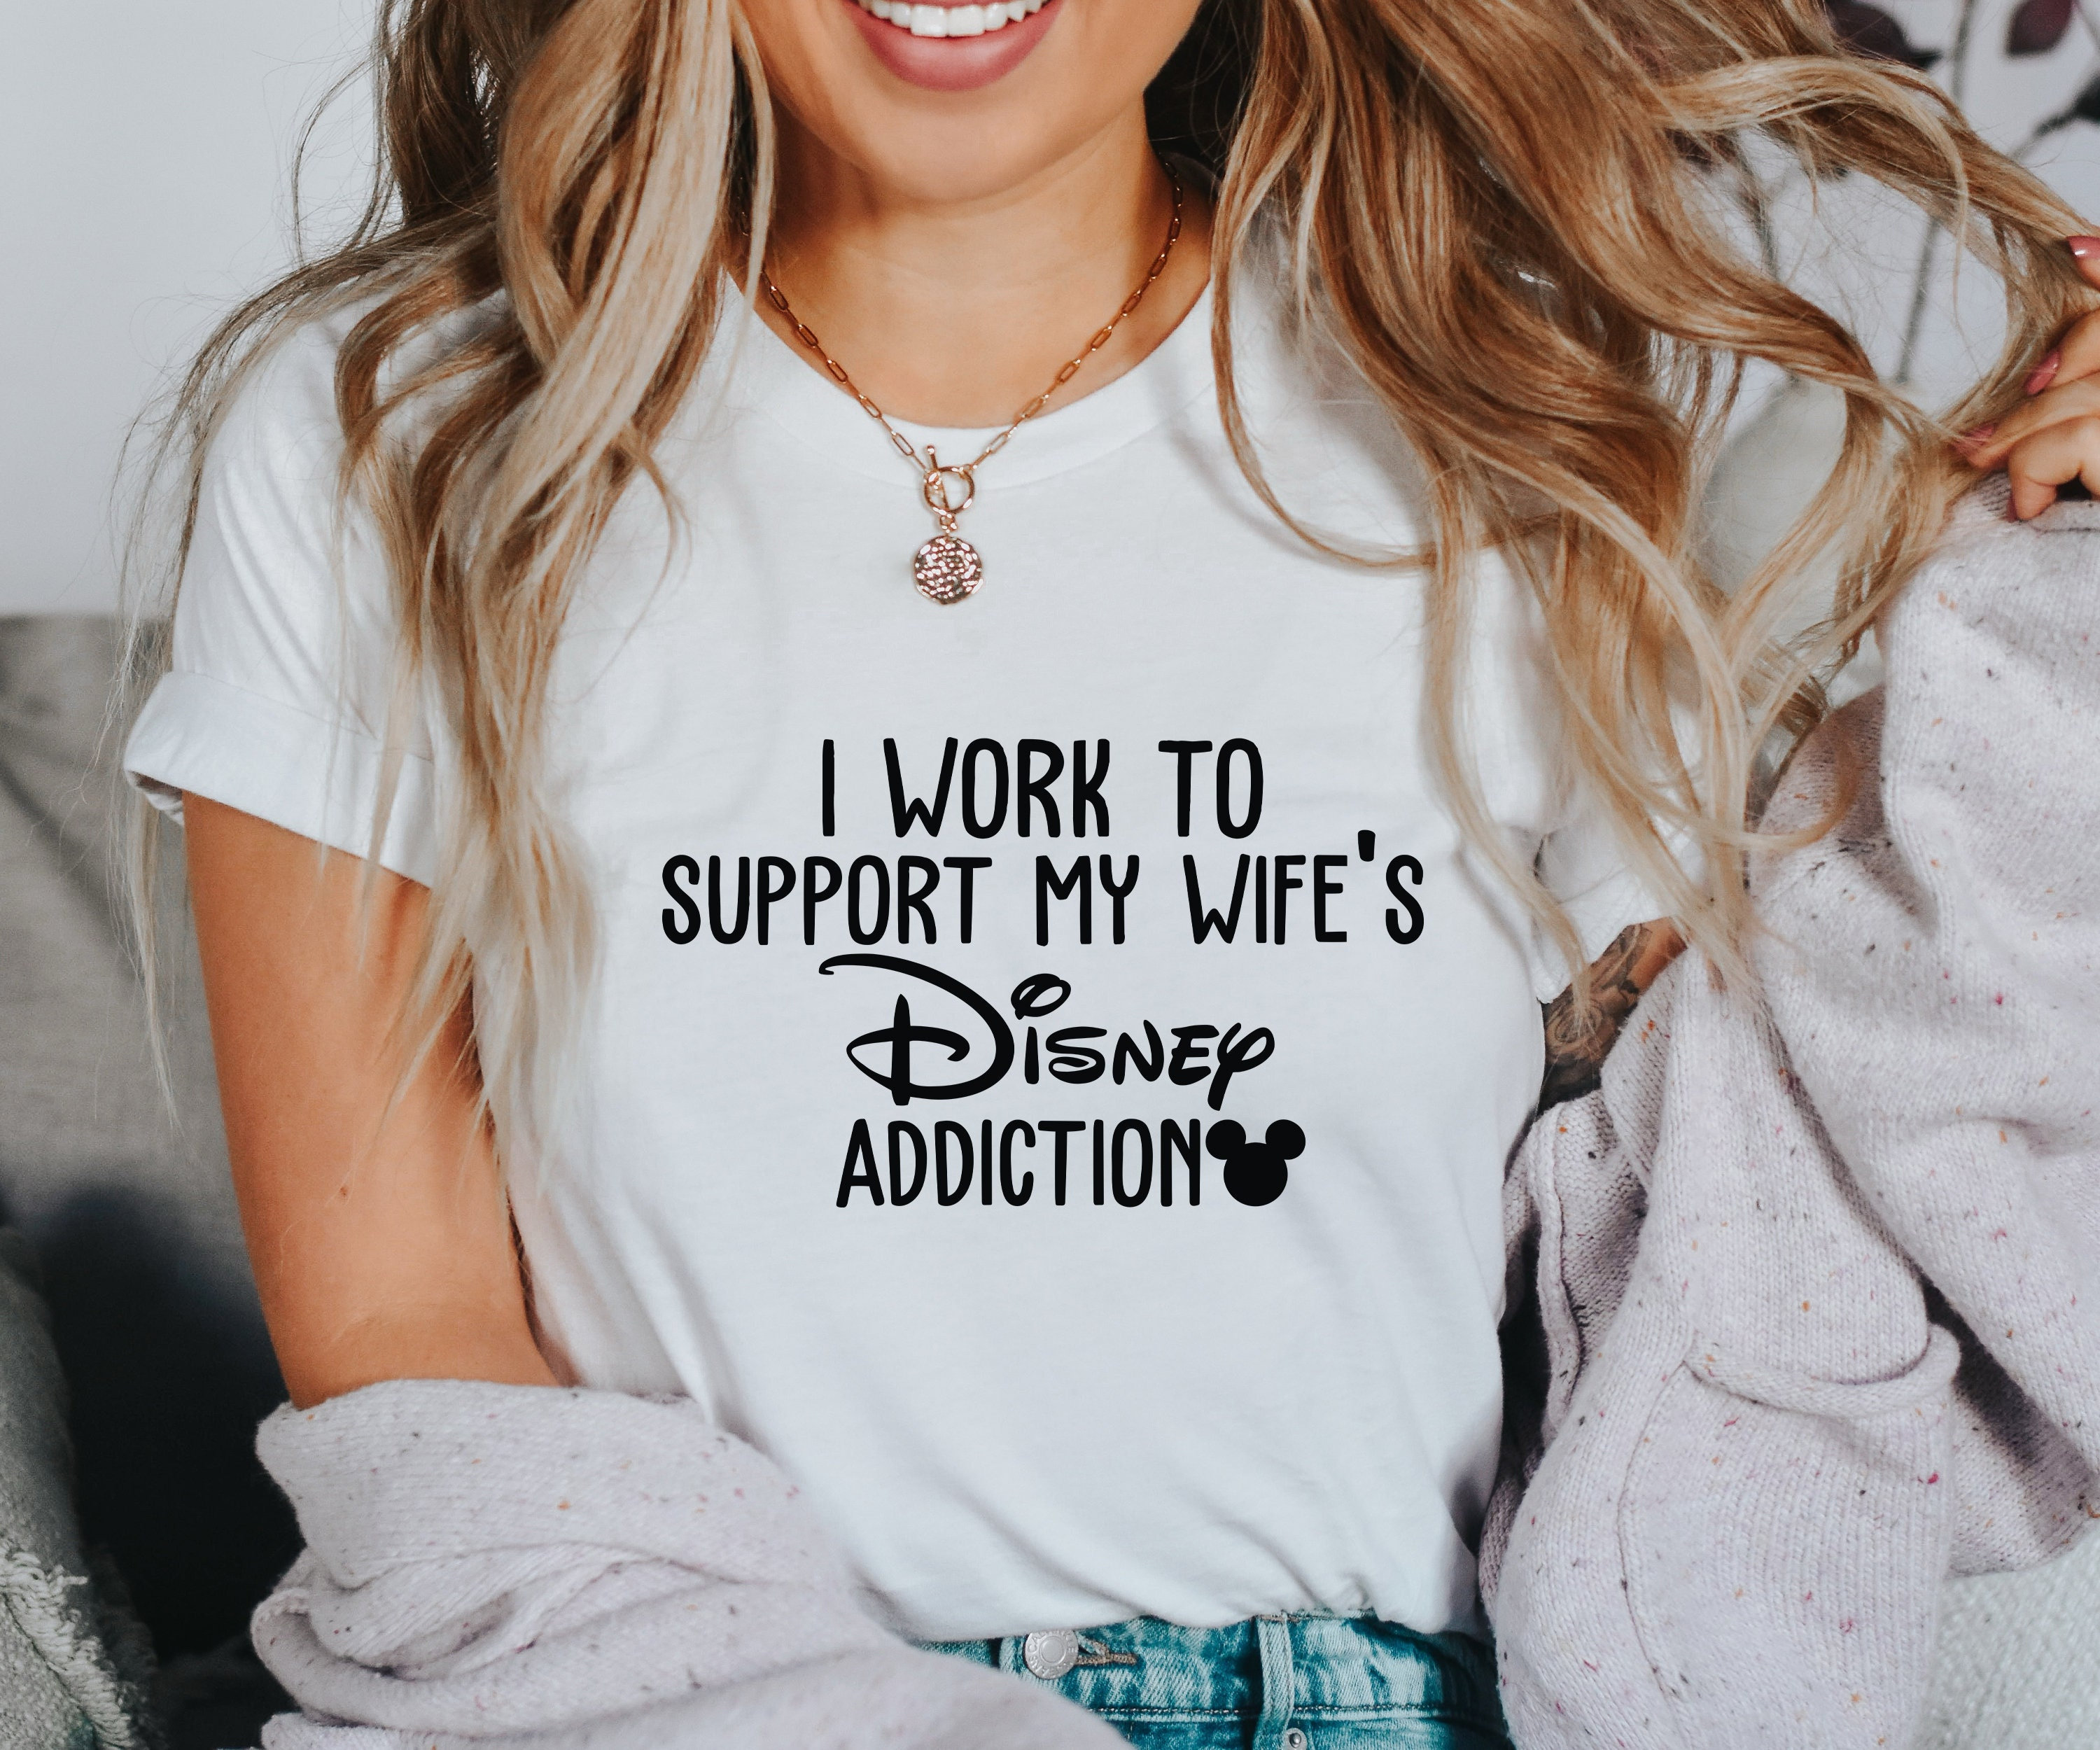 i work to support my wifes disney addiction shirt disney addiction shirtmens disney shirts disneyland shirt disney shirt disney shirts 6600 qur0o